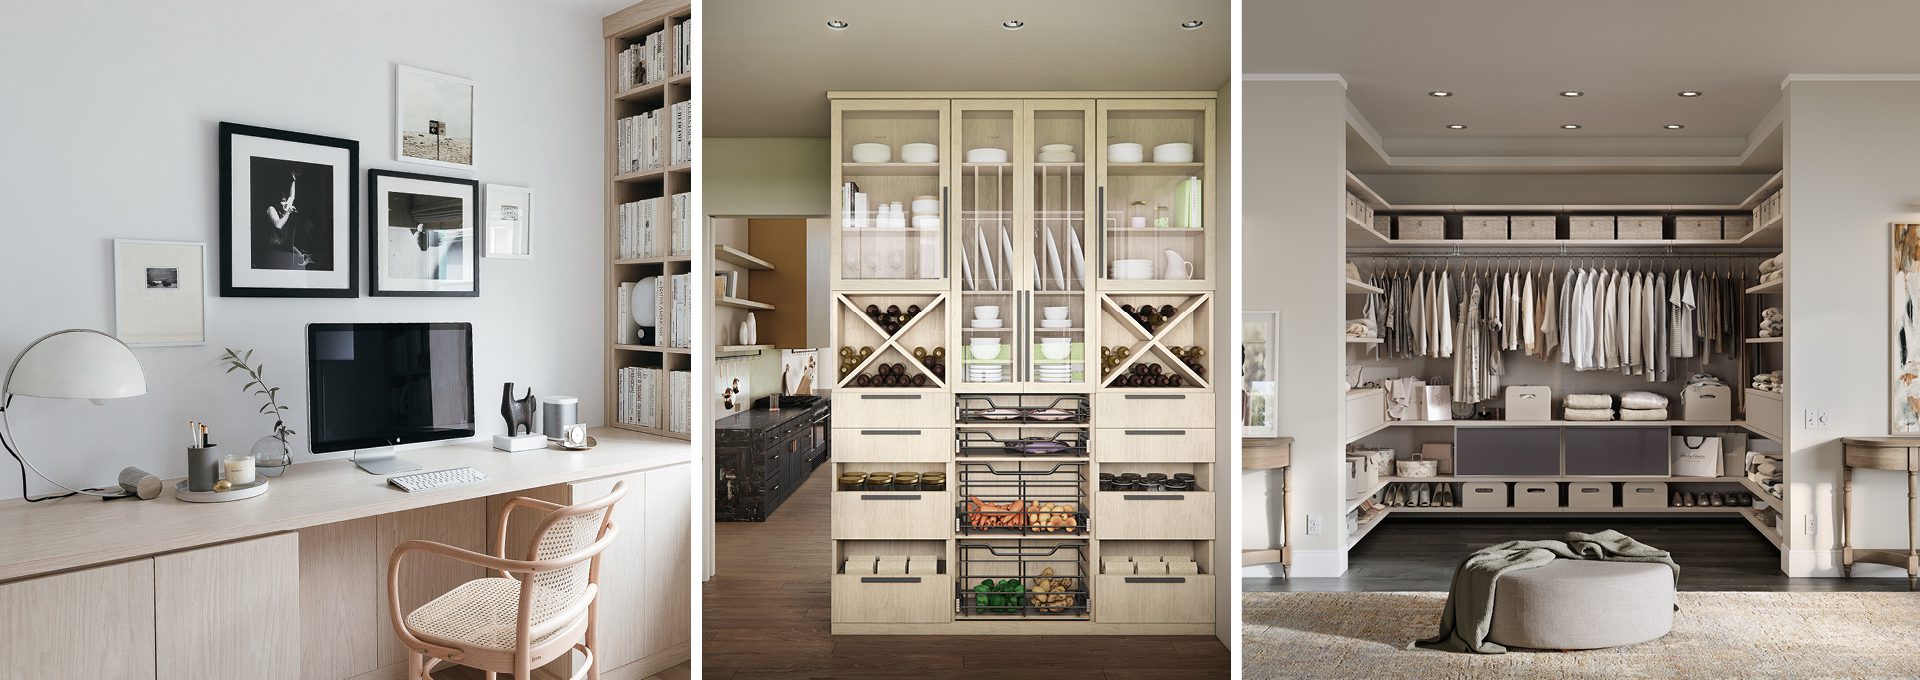 Enjoy the California Closets Spring Promotion Event with up to $2,500 savings for new walk in closet, media center, or kitchen pantry in Charlotte